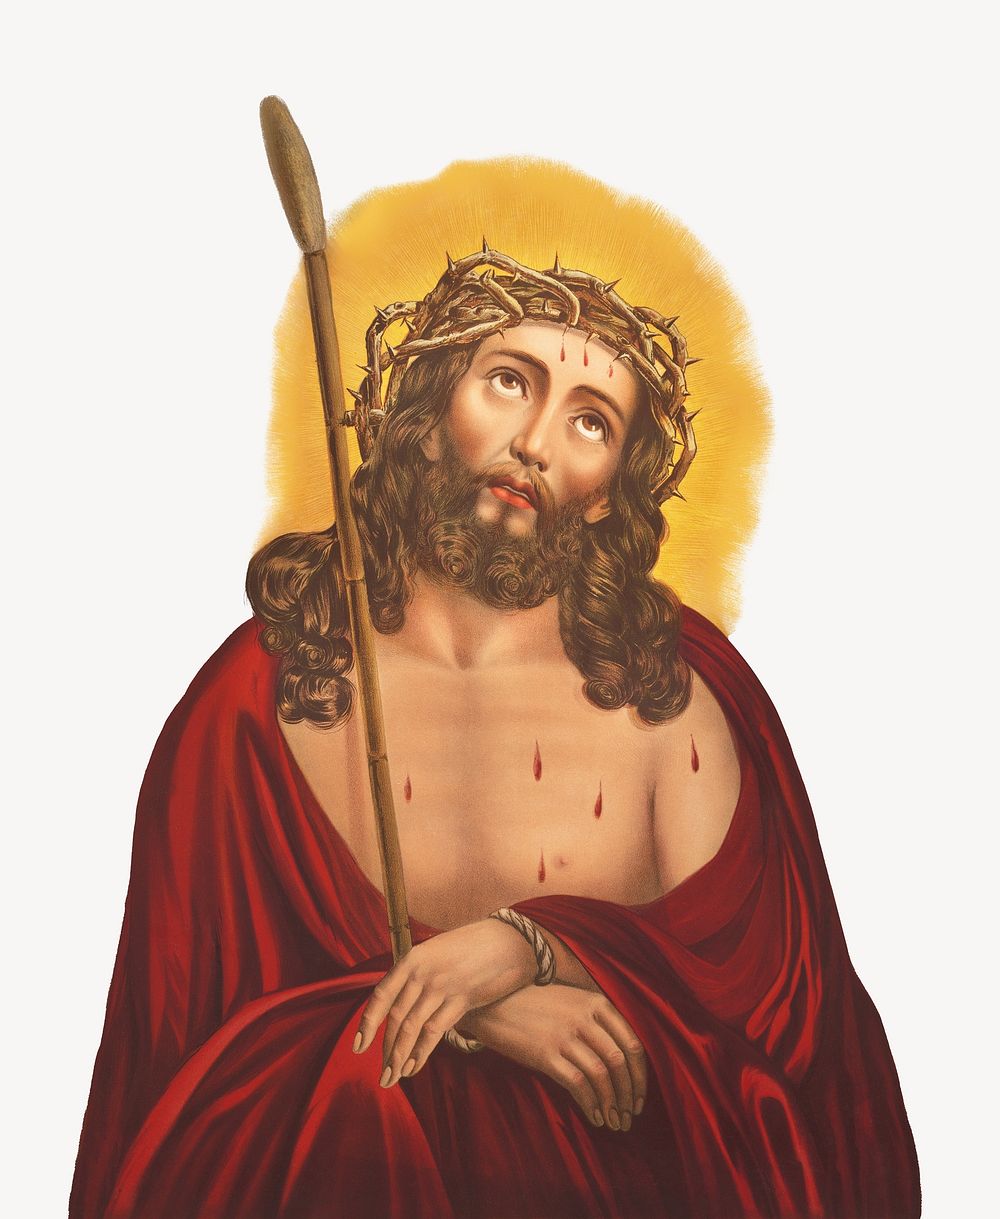 Jesus Christ with crown of thorns.  Remastered by rawpixel